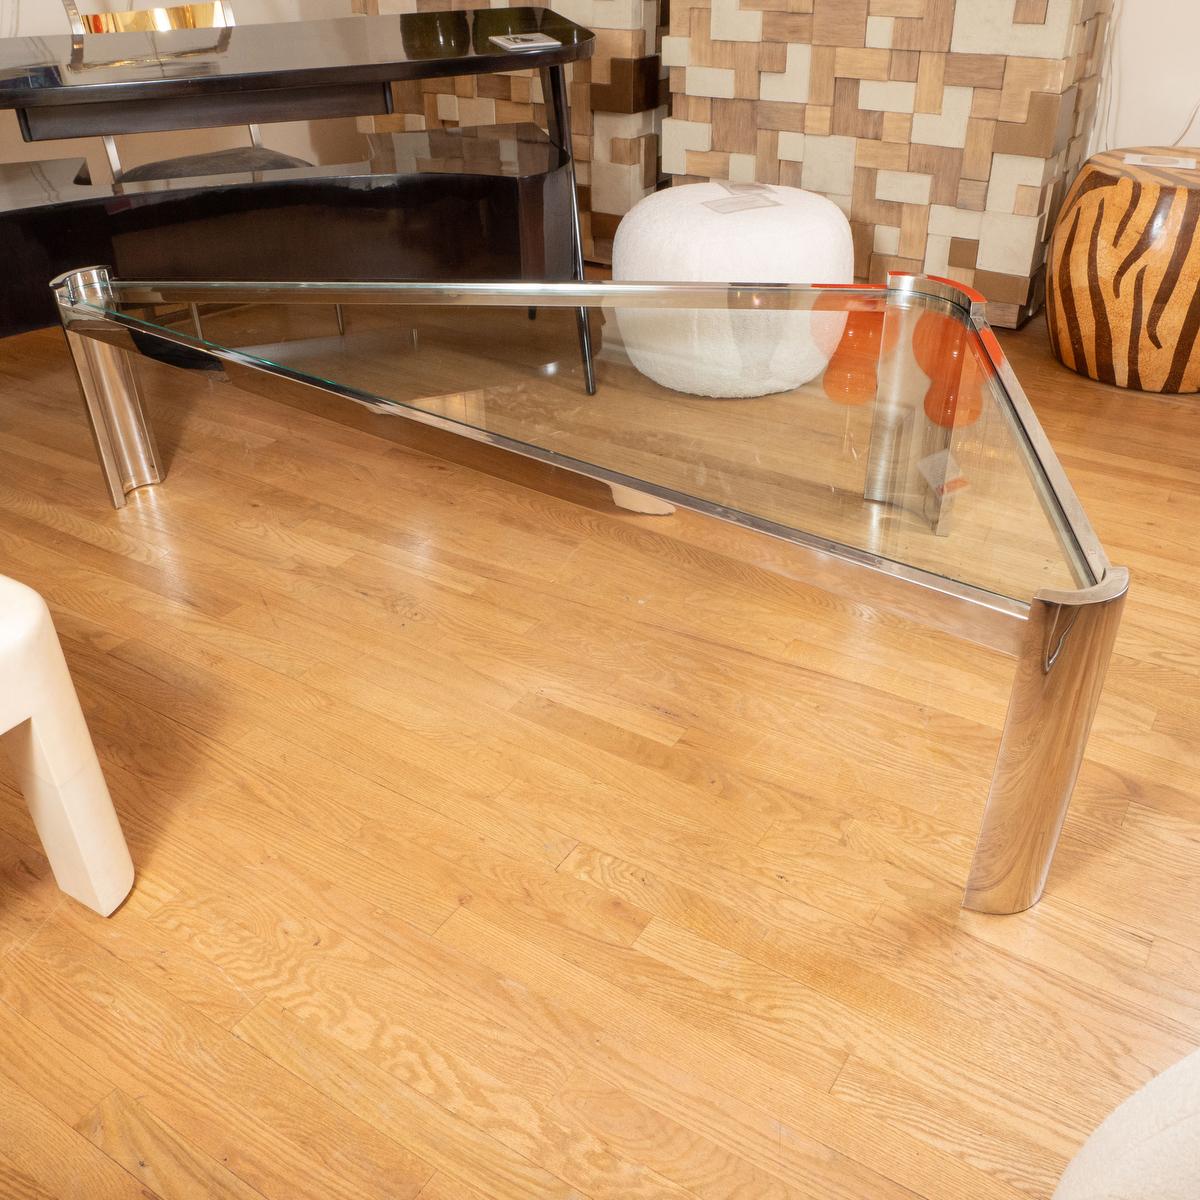 Chrome and glass triangular coffee table by Ron Seff.